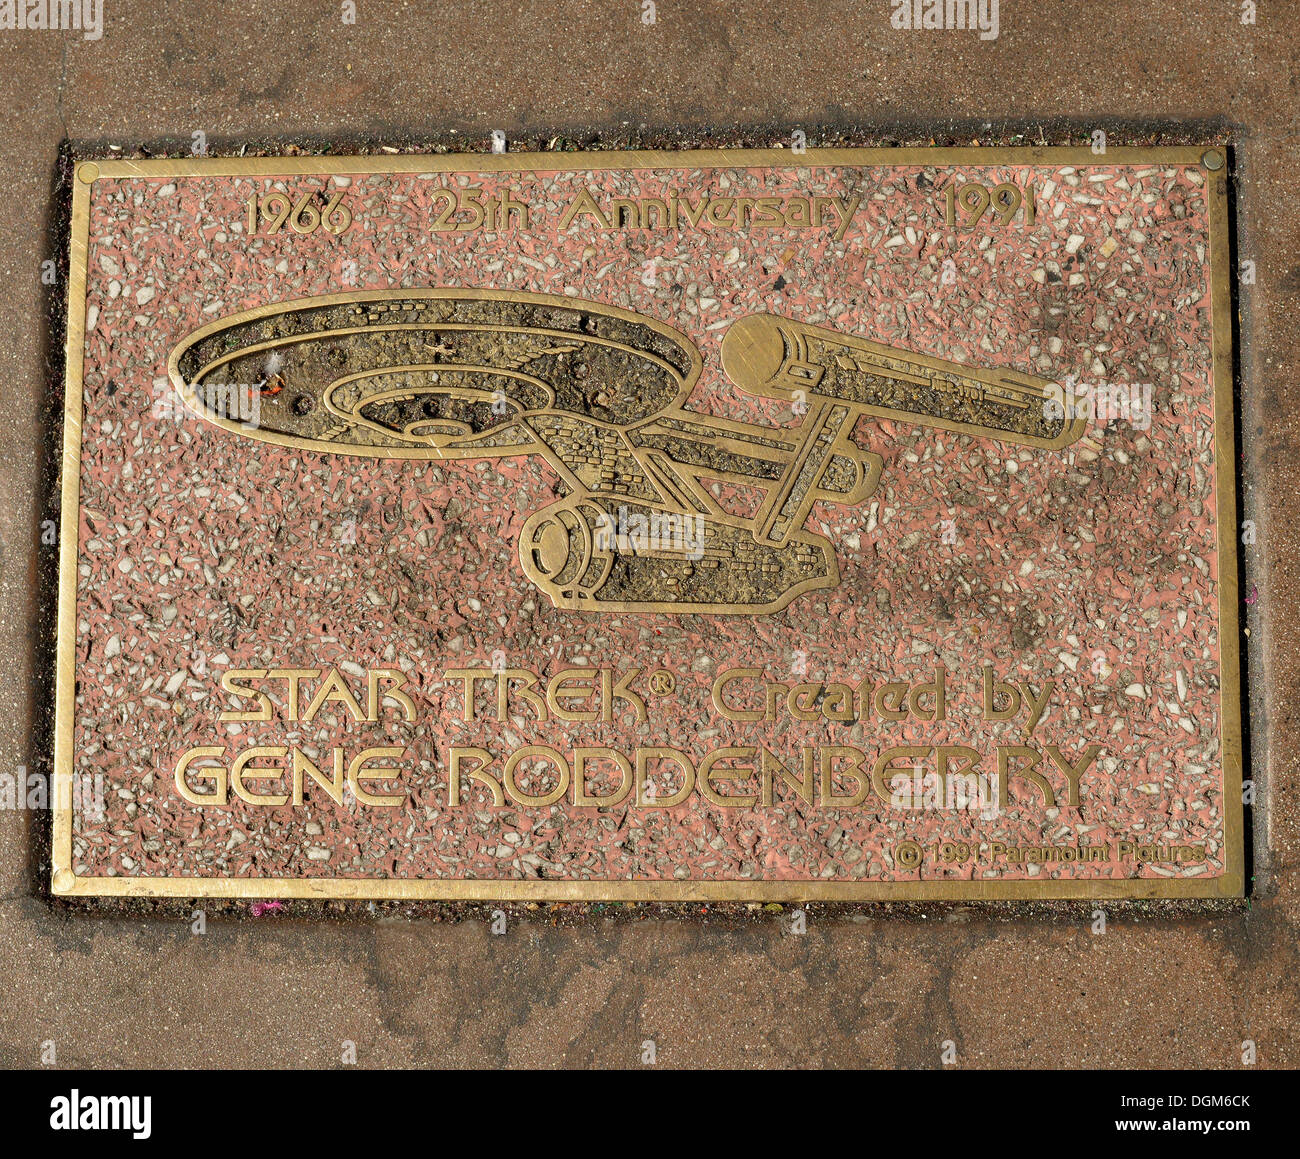 Bronze plaque for Star Trek created by Gene Roddenberry, Walk of Fame, Hollywood Boulevard, Hollywood, Los Angeles, California Stock Photo